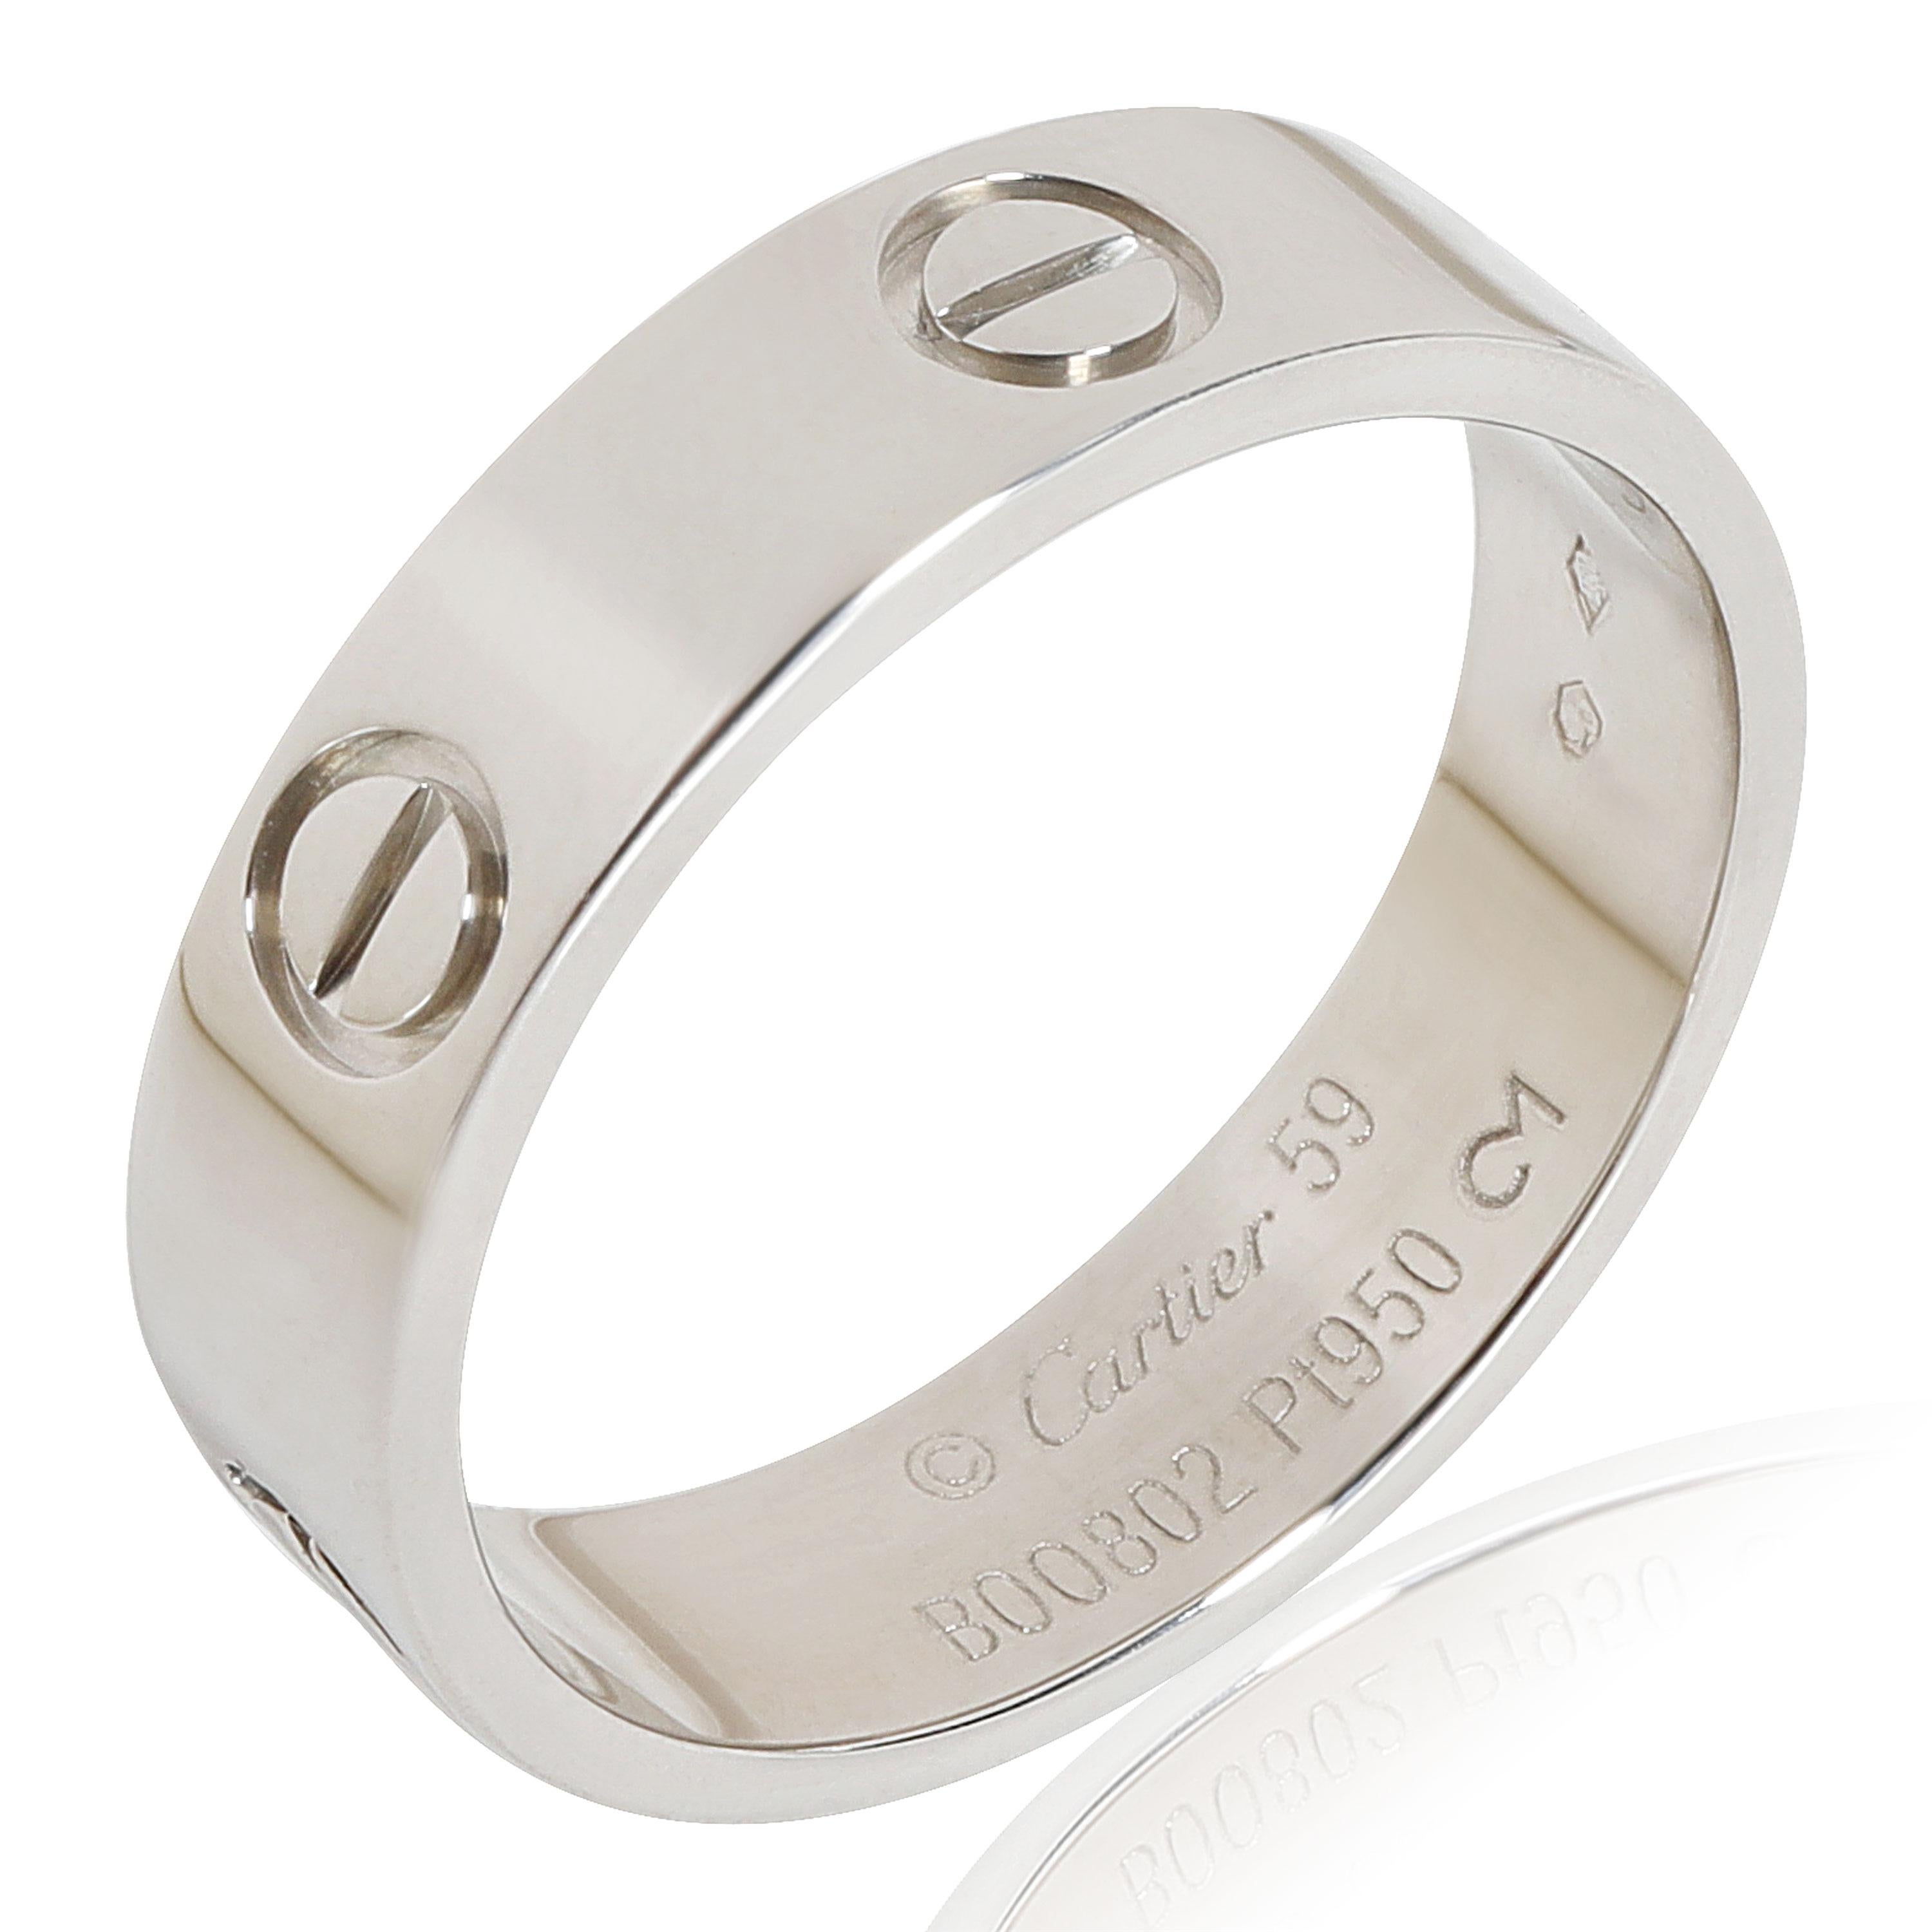 Cartier LOVE Ring in 950 Platinum

PRIMARY DETAILS
SKU: 116125
Listing Title: Cartier LOVE Ring in 950 Platinum
Condition Description: Retails for 4000 USD. In excellent condition and recently polished. Ring size is 8.75.
Brand: